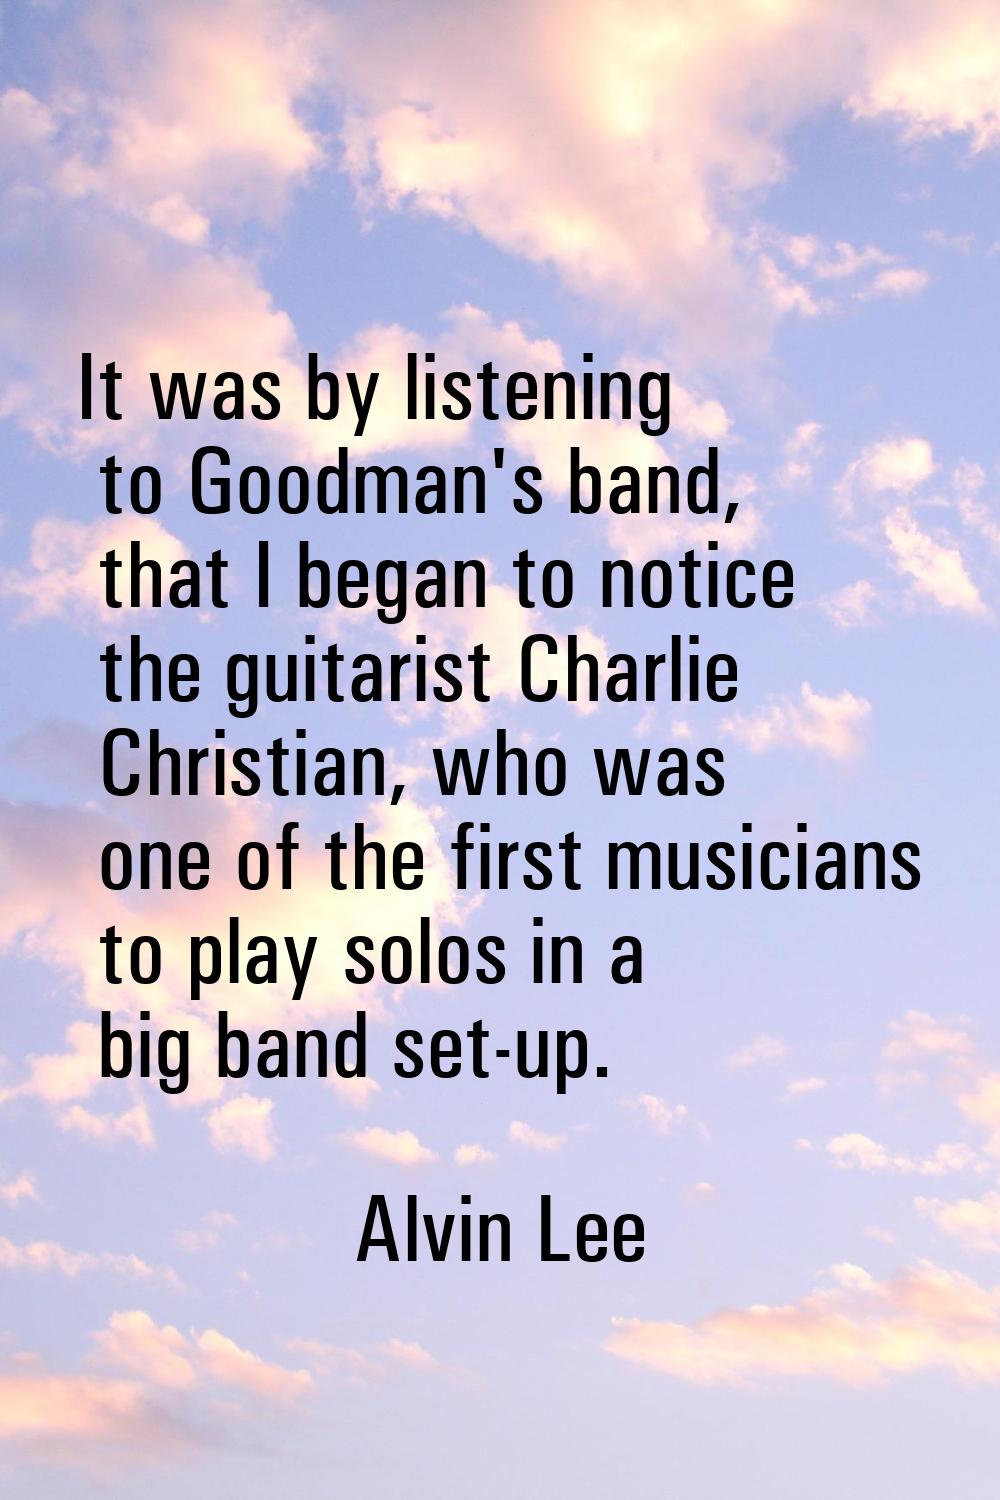 It was by listening to Goodman's band, that I began to notice the guitarist Charlie Christian, who 